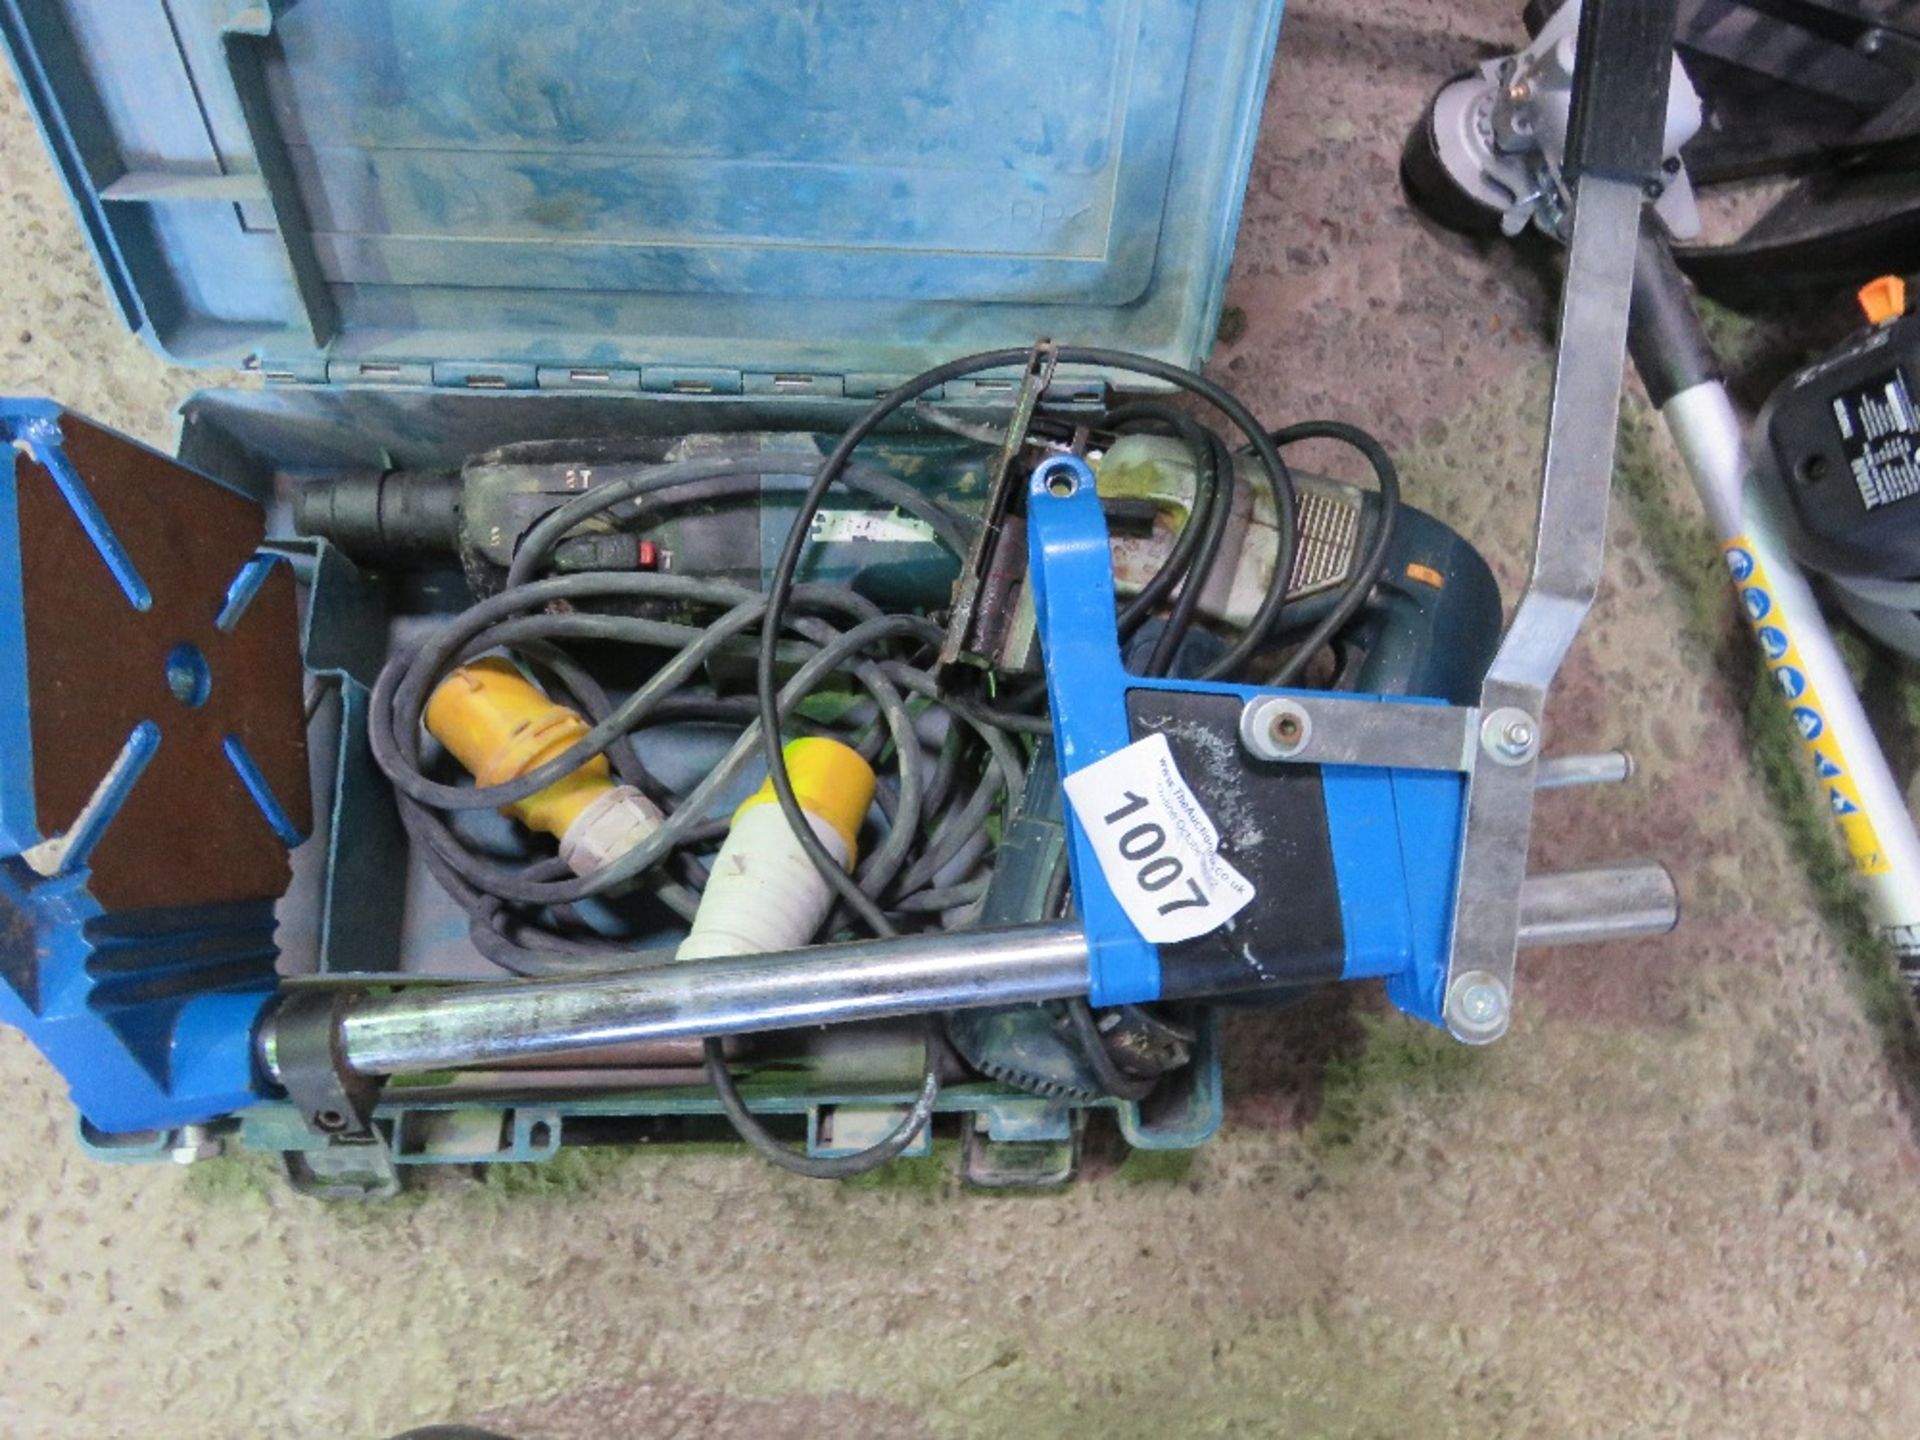 STAND, JISGAW AND A DRILL, 110VOLT. SOURCED FROM COMPANY LIQUIDATION. THIS LOT IS SOLD UNDER THE